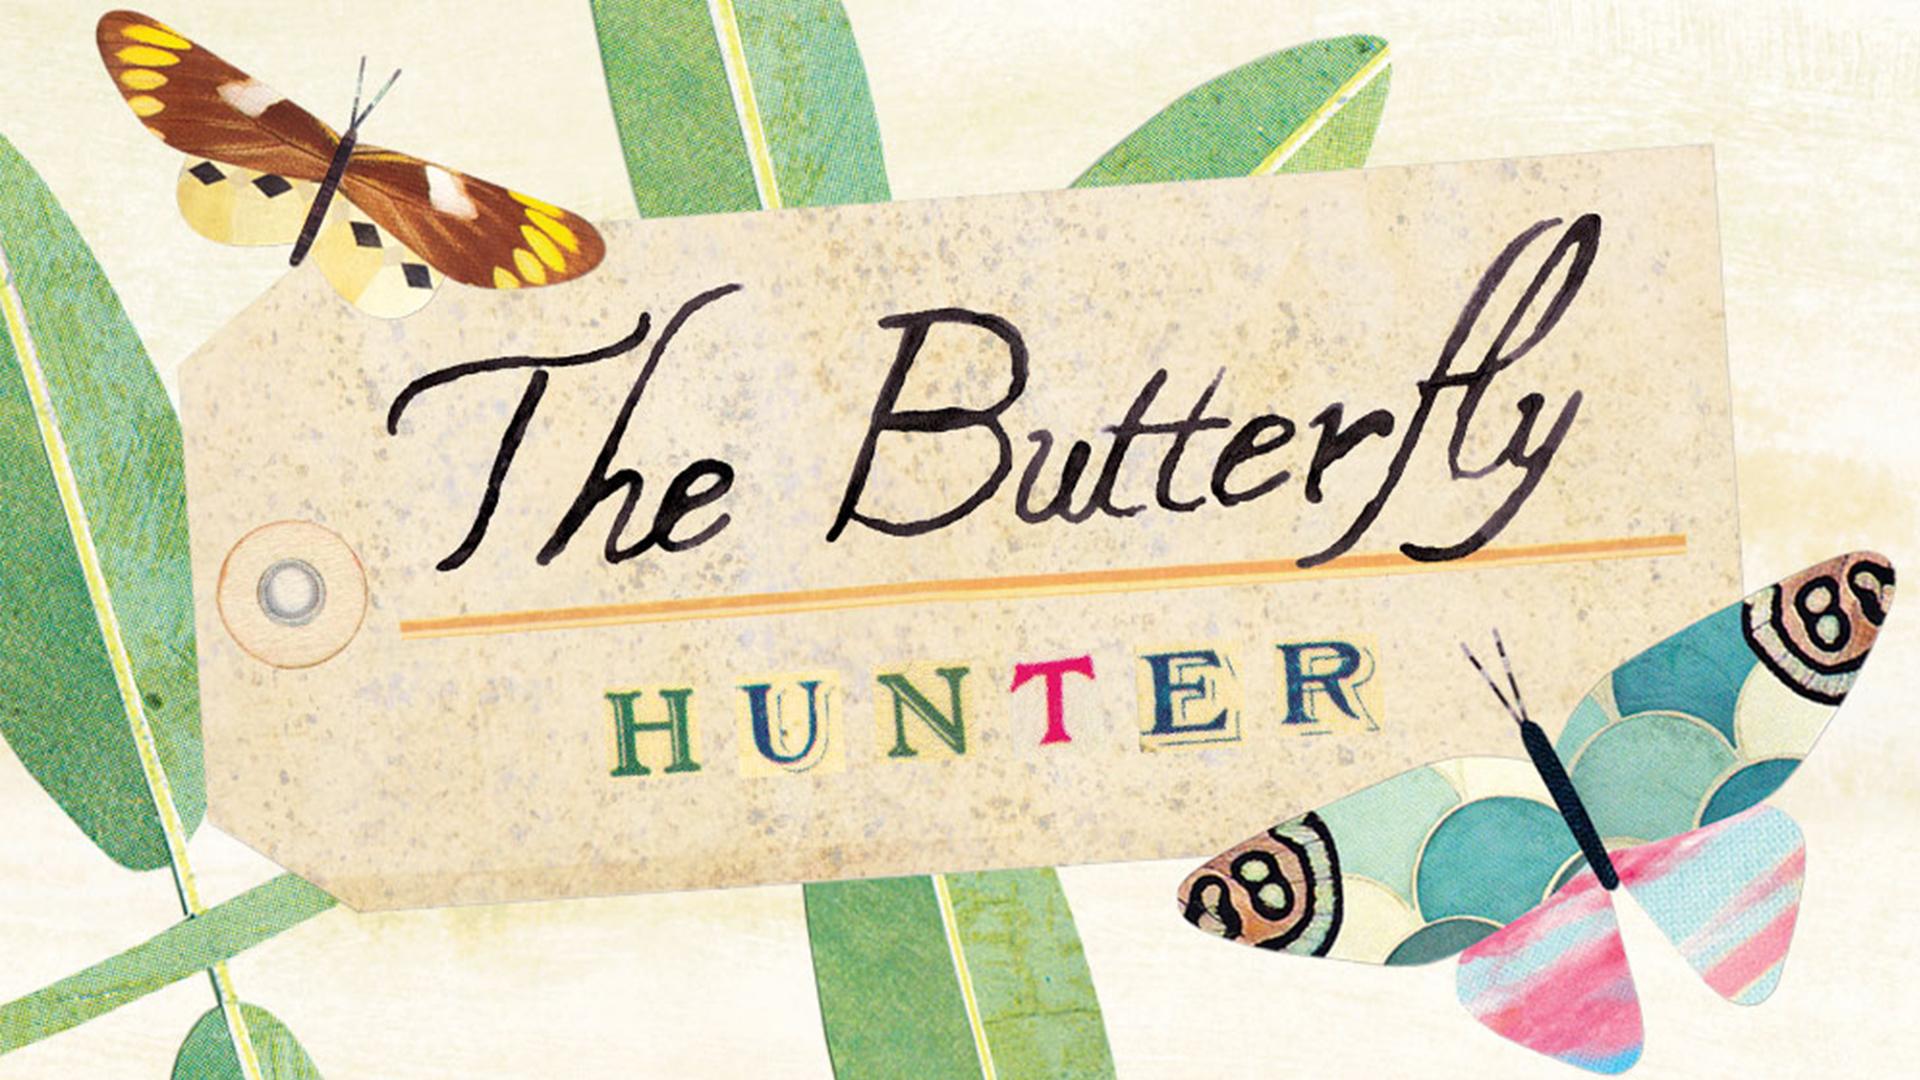 Illustration of The Butterfly Hunter written on a luggage tag with butterflies and leaves